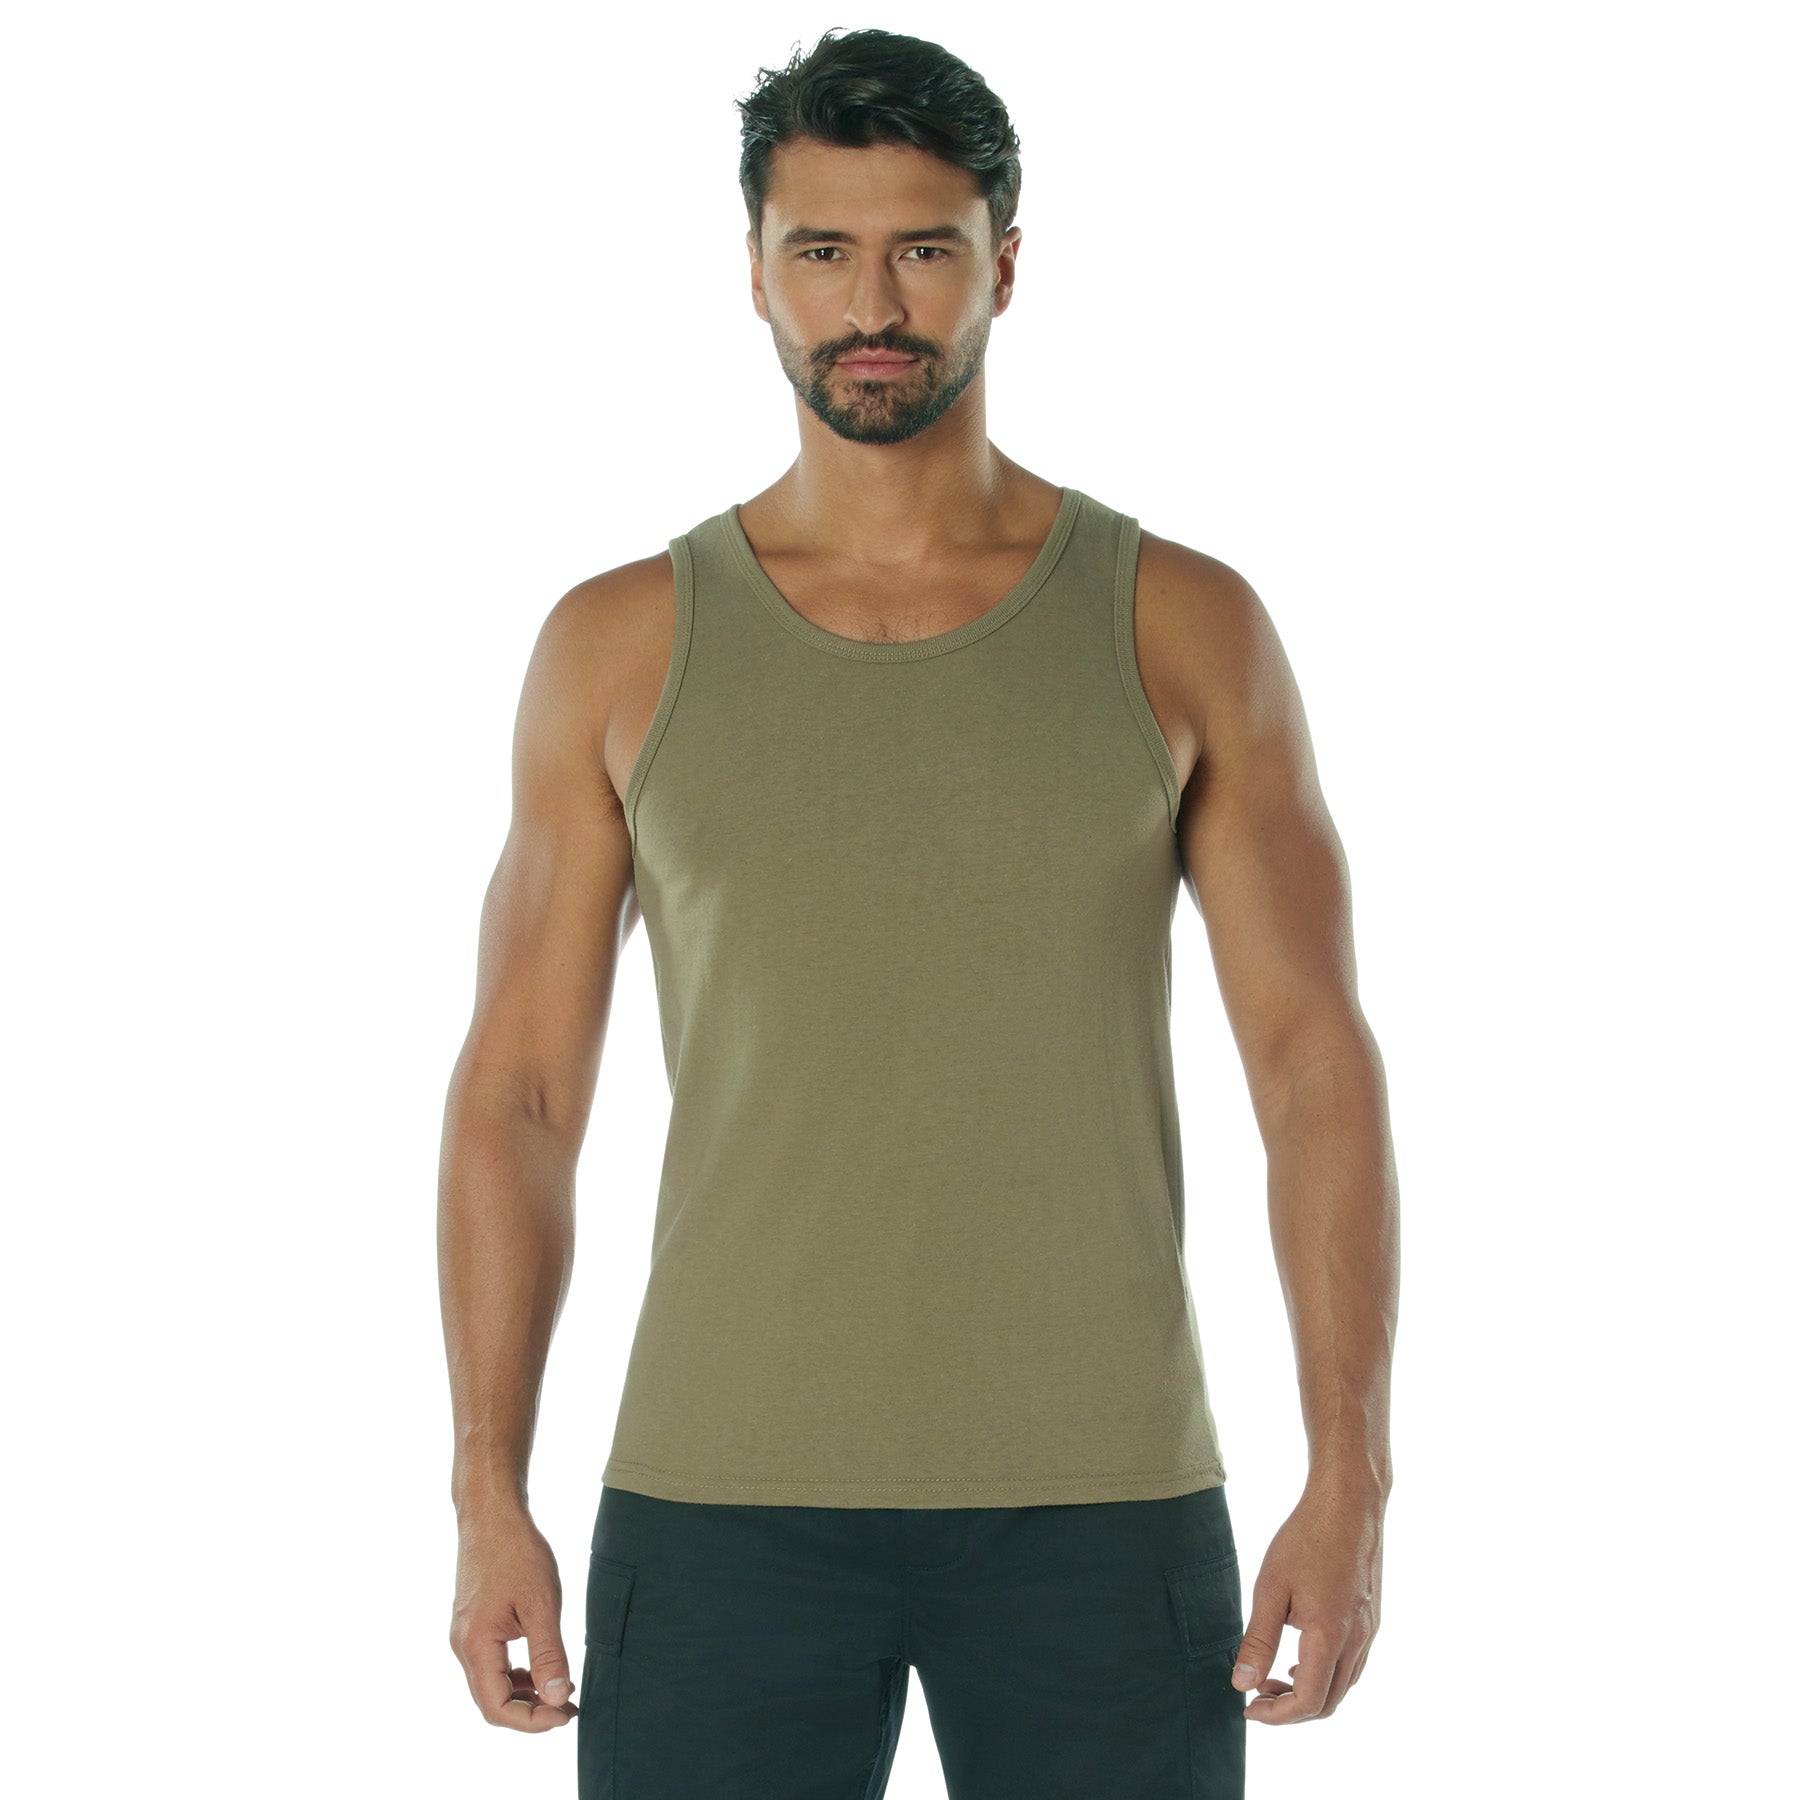 [AR 670-1][Military] Poly/Cotton Tank Tops Coyote Brown AR 670-1